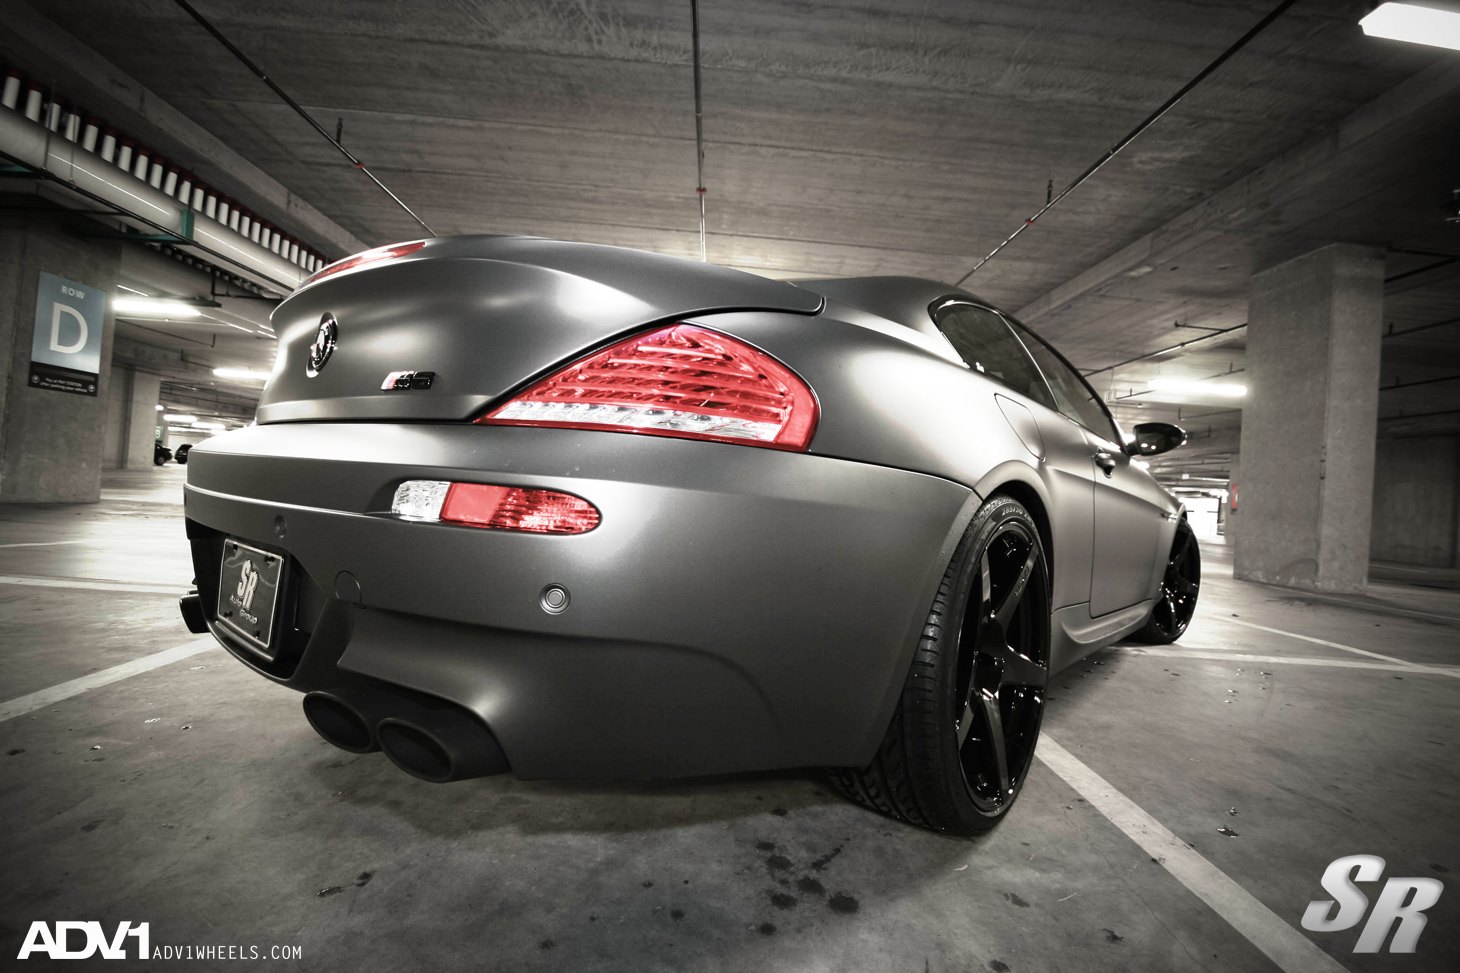 Red LED Taillights on Gray Matte BMW M6 - Photo by ADV.1